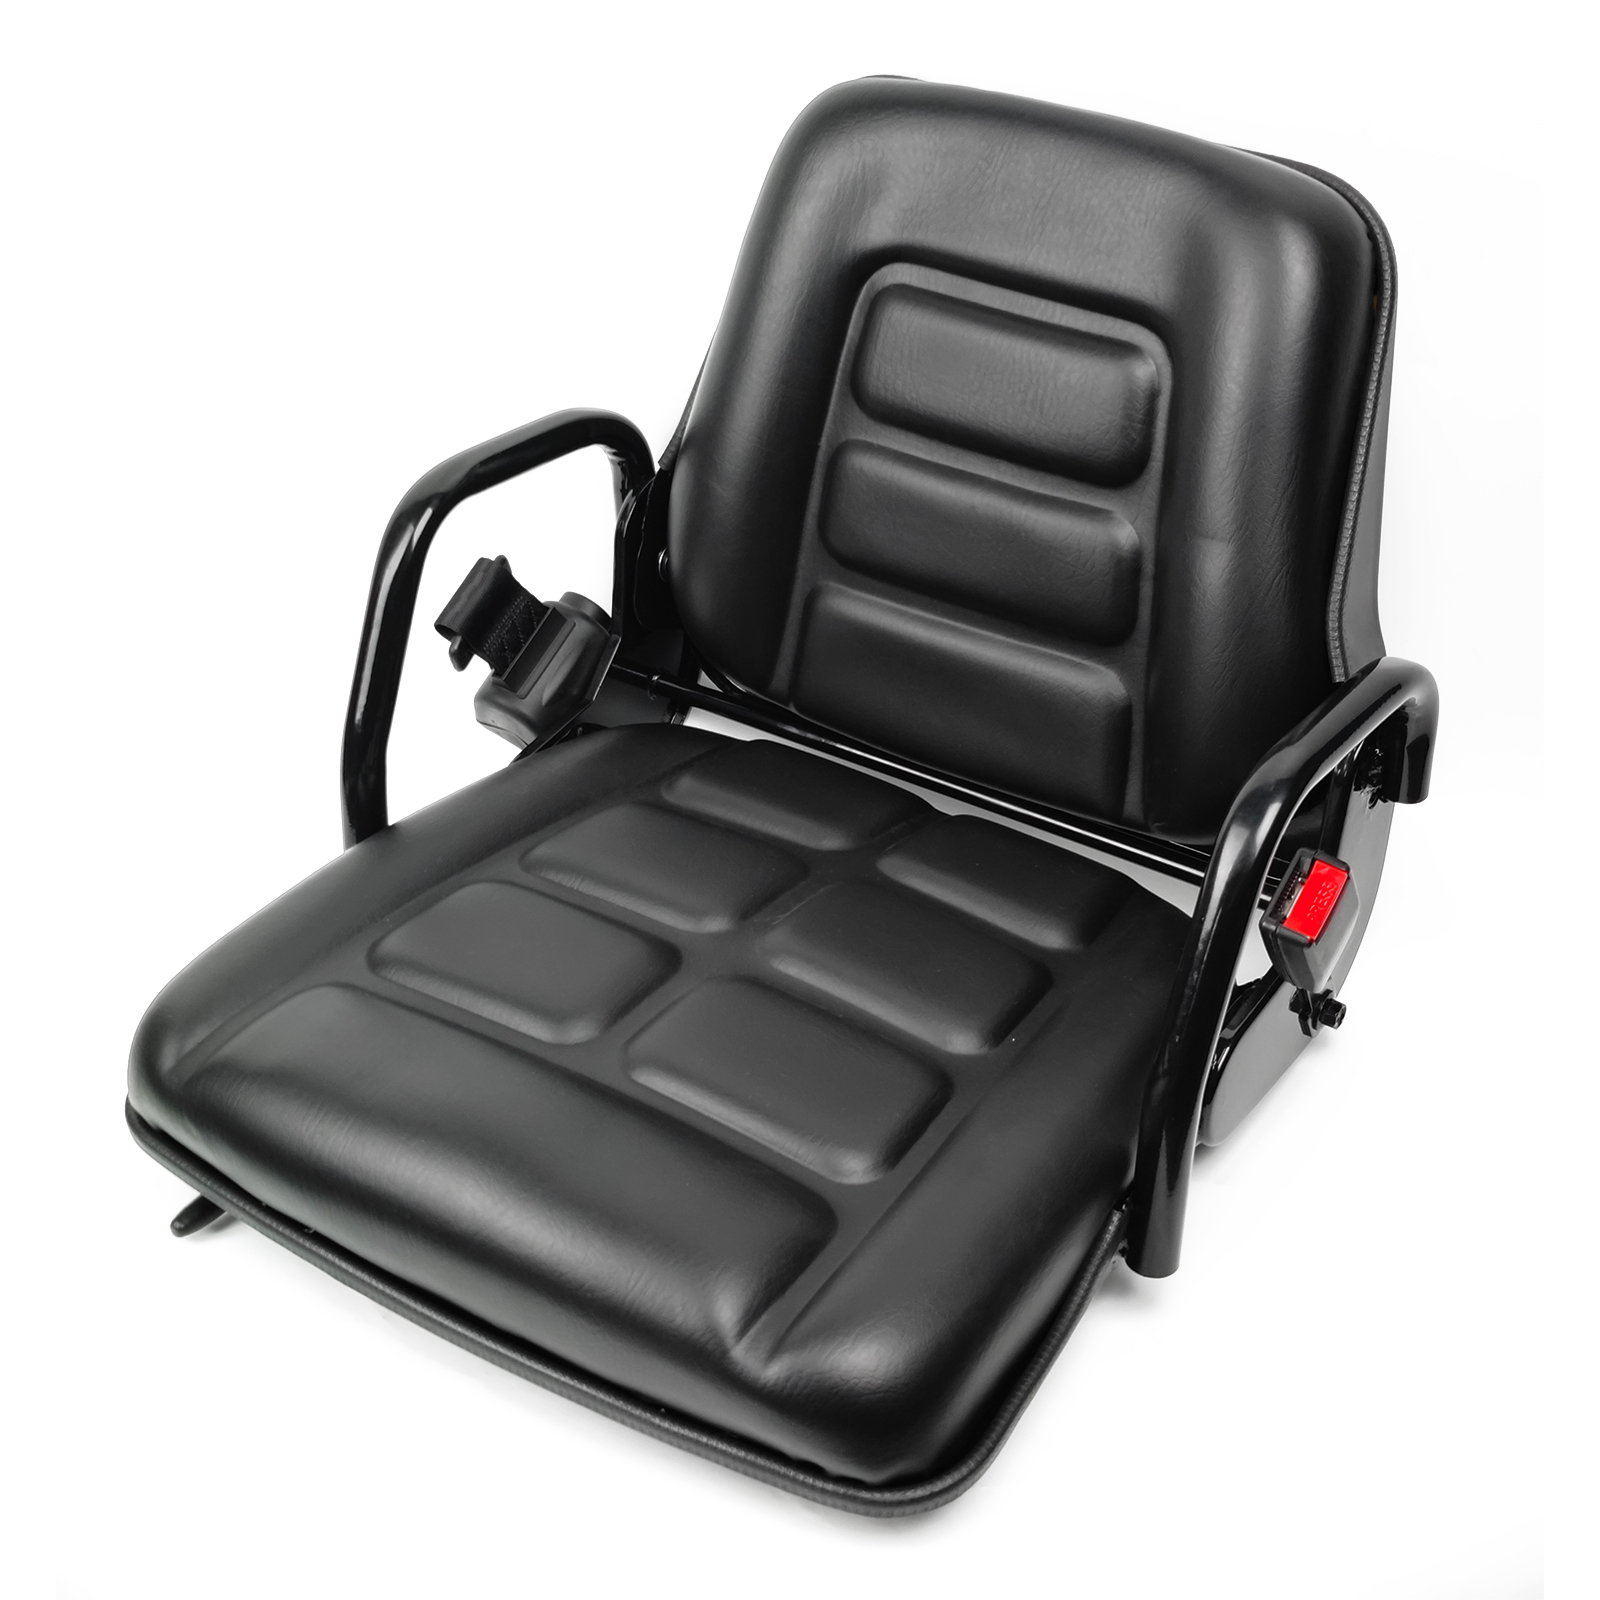 Wholesale Price China Seat Slide - Forklift Seat with Integrated Steel Armrest Fold Down Backrest Fits Caterpillar Mitsubishi Doosan forklifts – Qinglin Seat